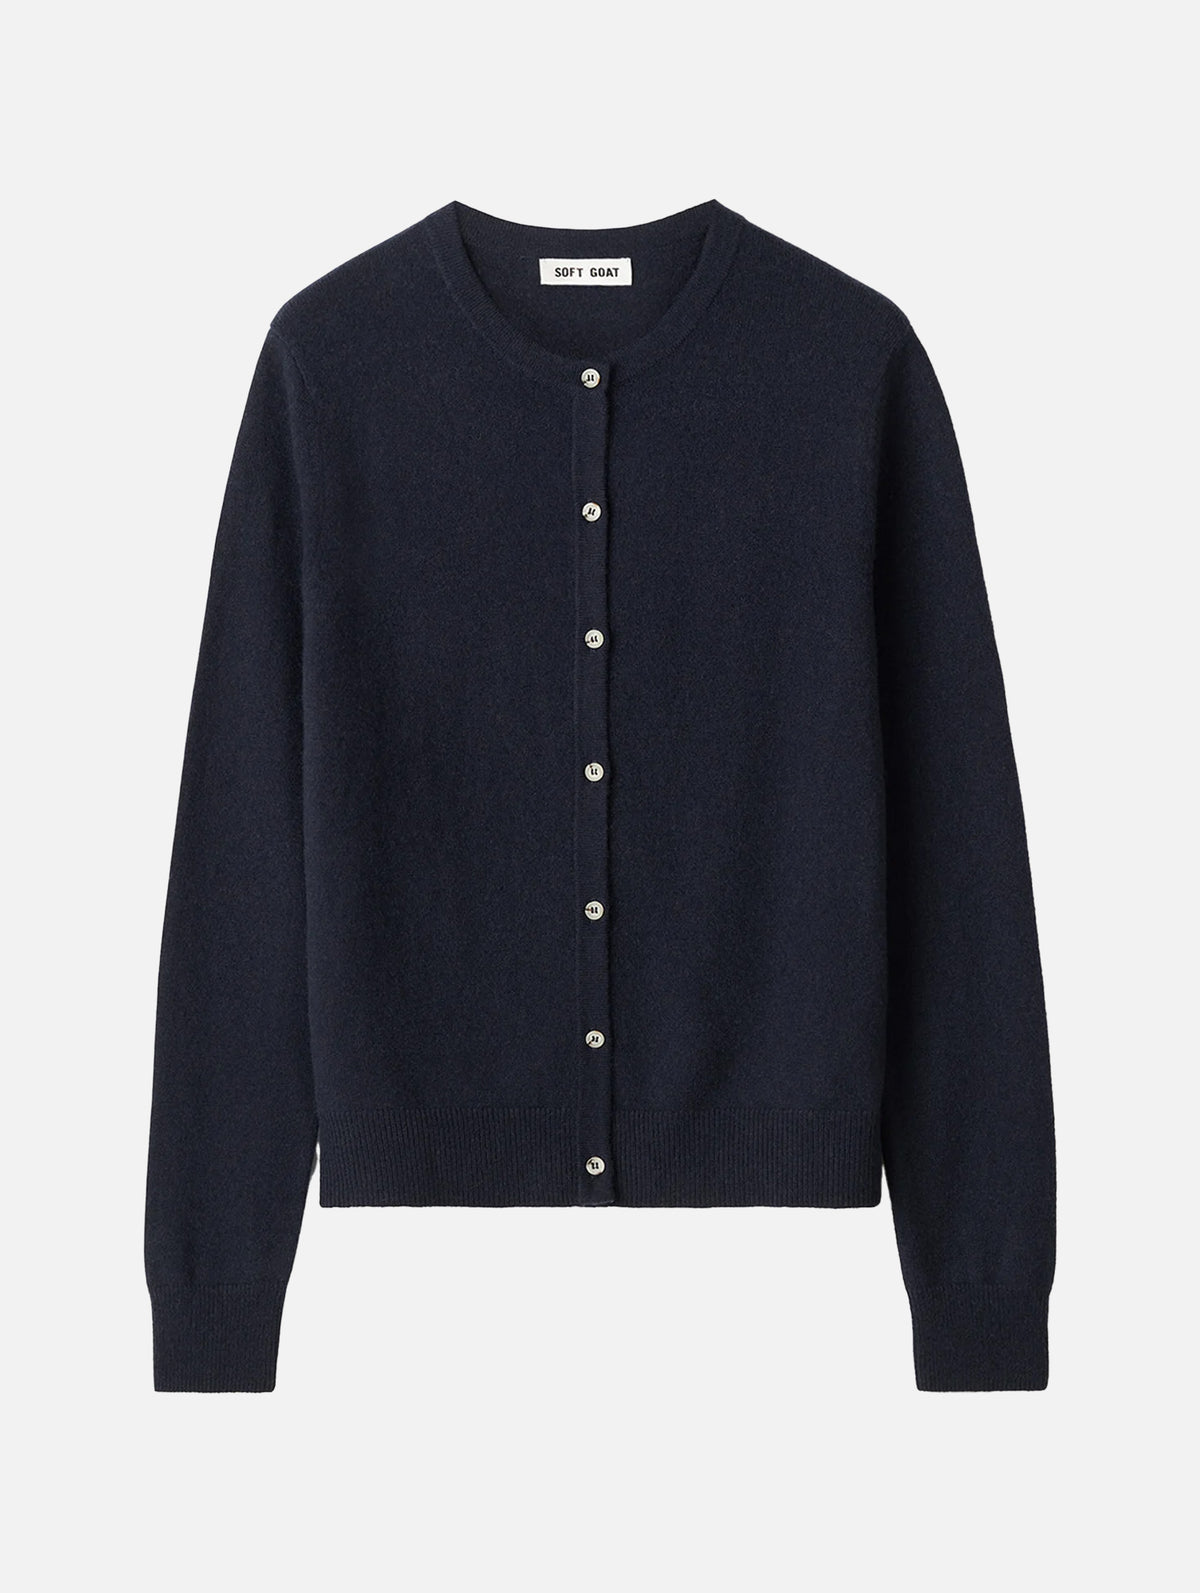 Classic Cashmere Cardigan in Navy